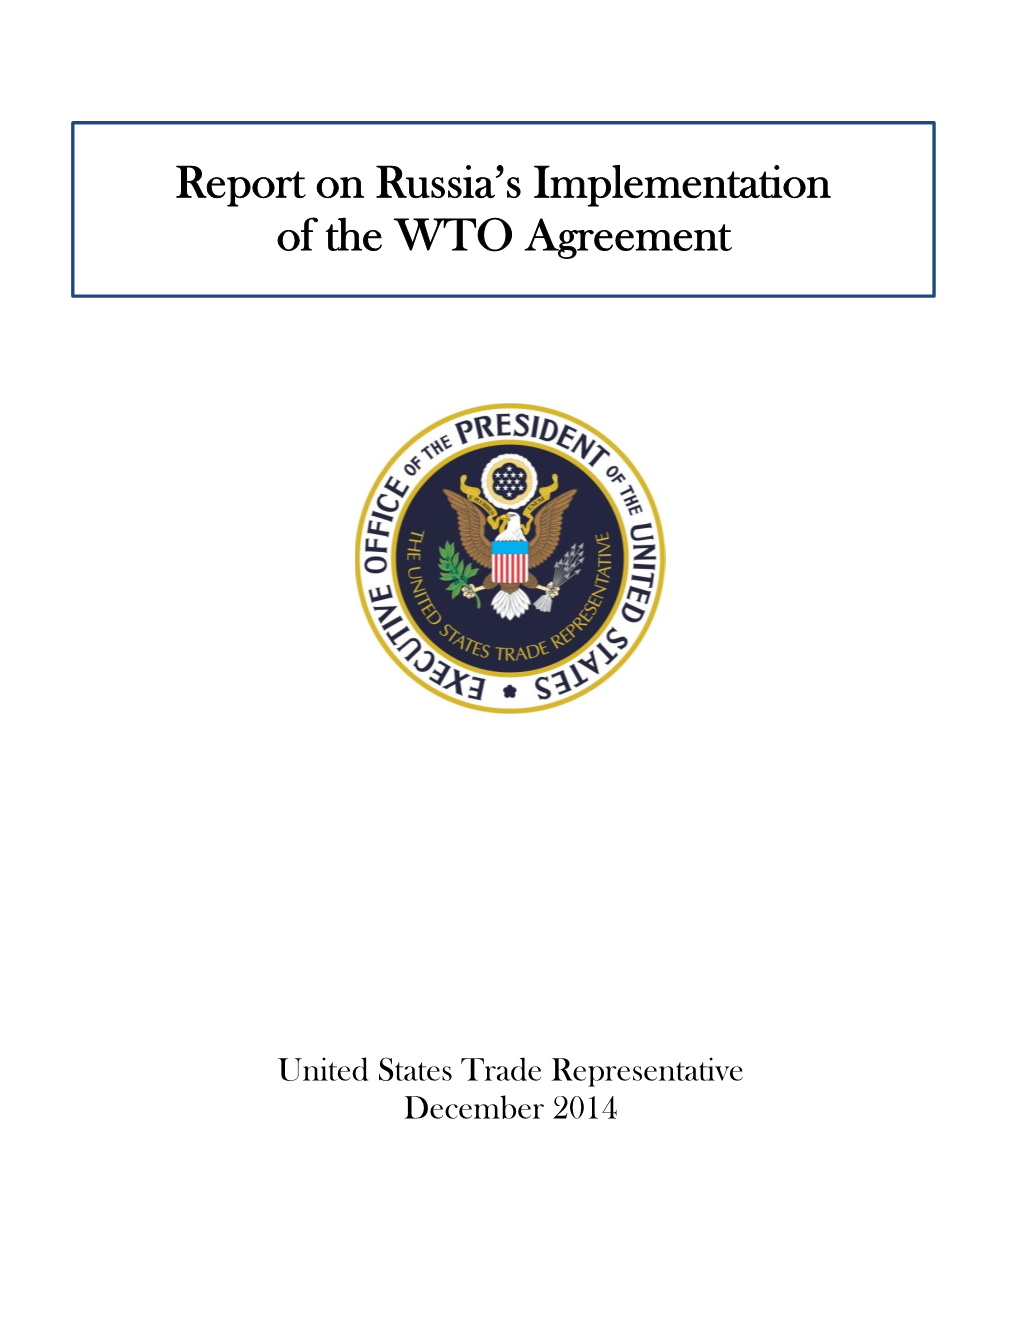 Report on Russia's Implementation of the WTO Agreement